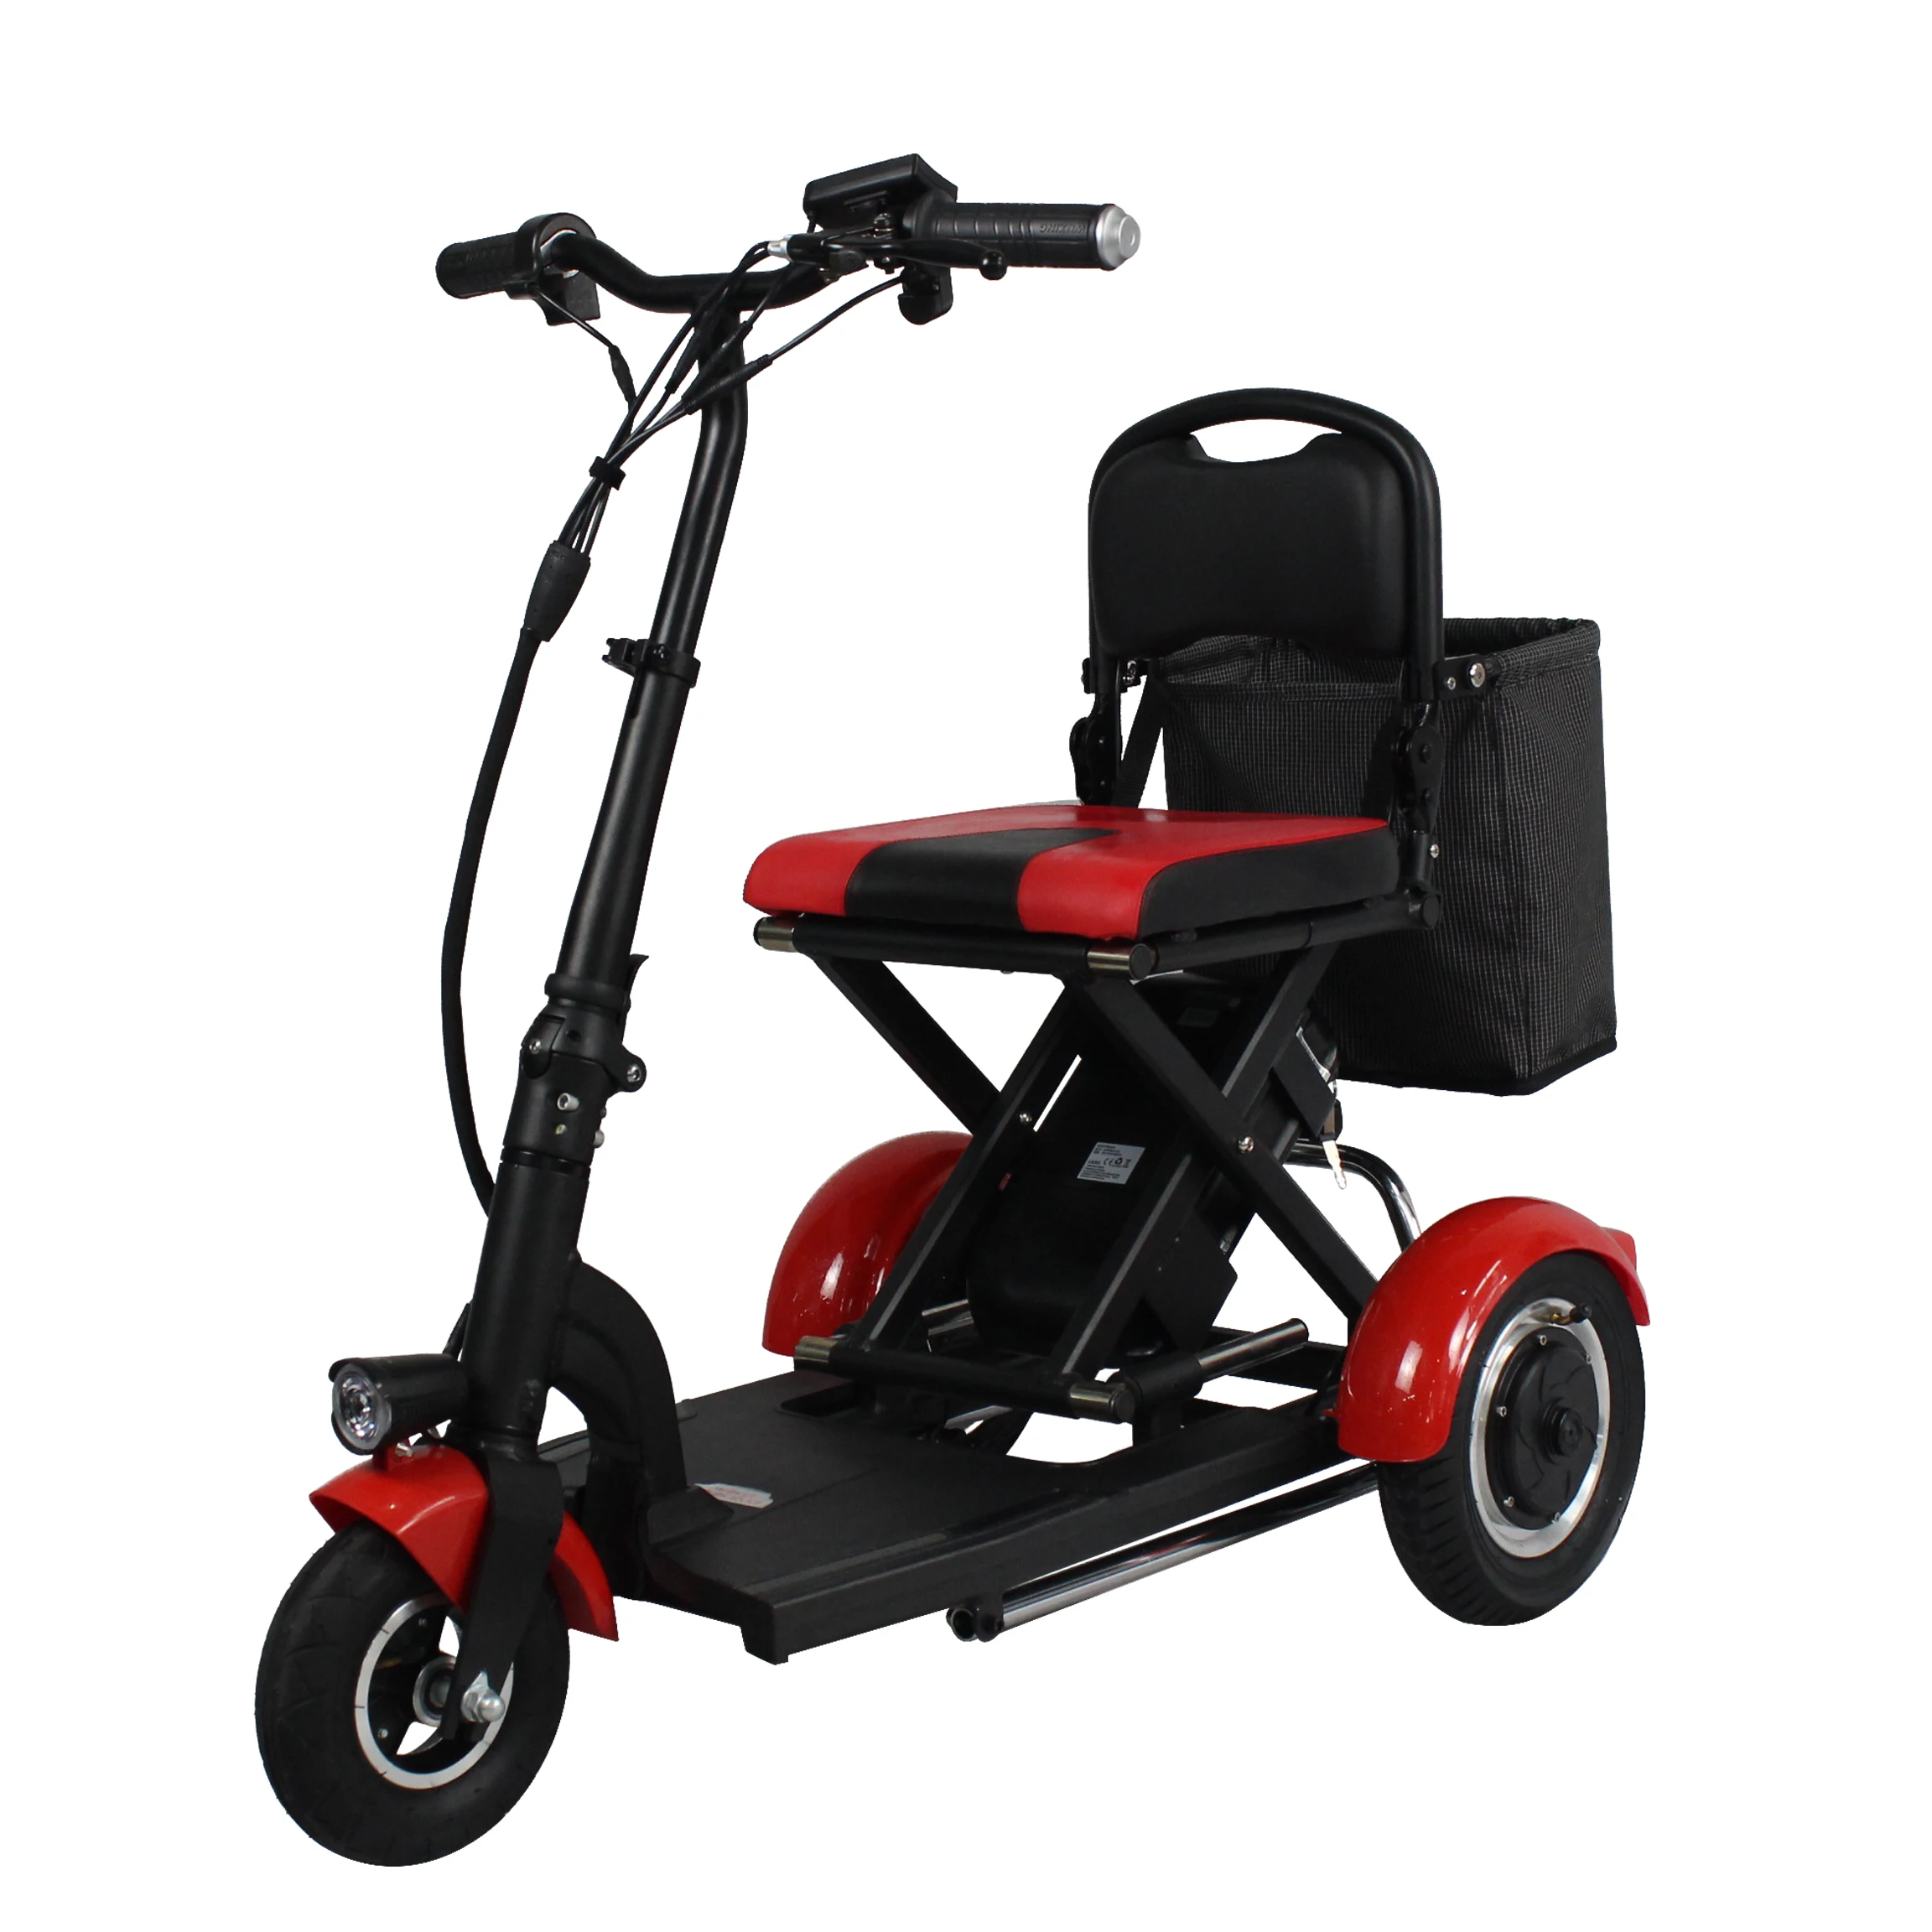 

3 Wheel Foldable Cheap Mobility Adult Kick Moped E Scooter Handicapped Scooters Electric Tricycles For Sale, Customized